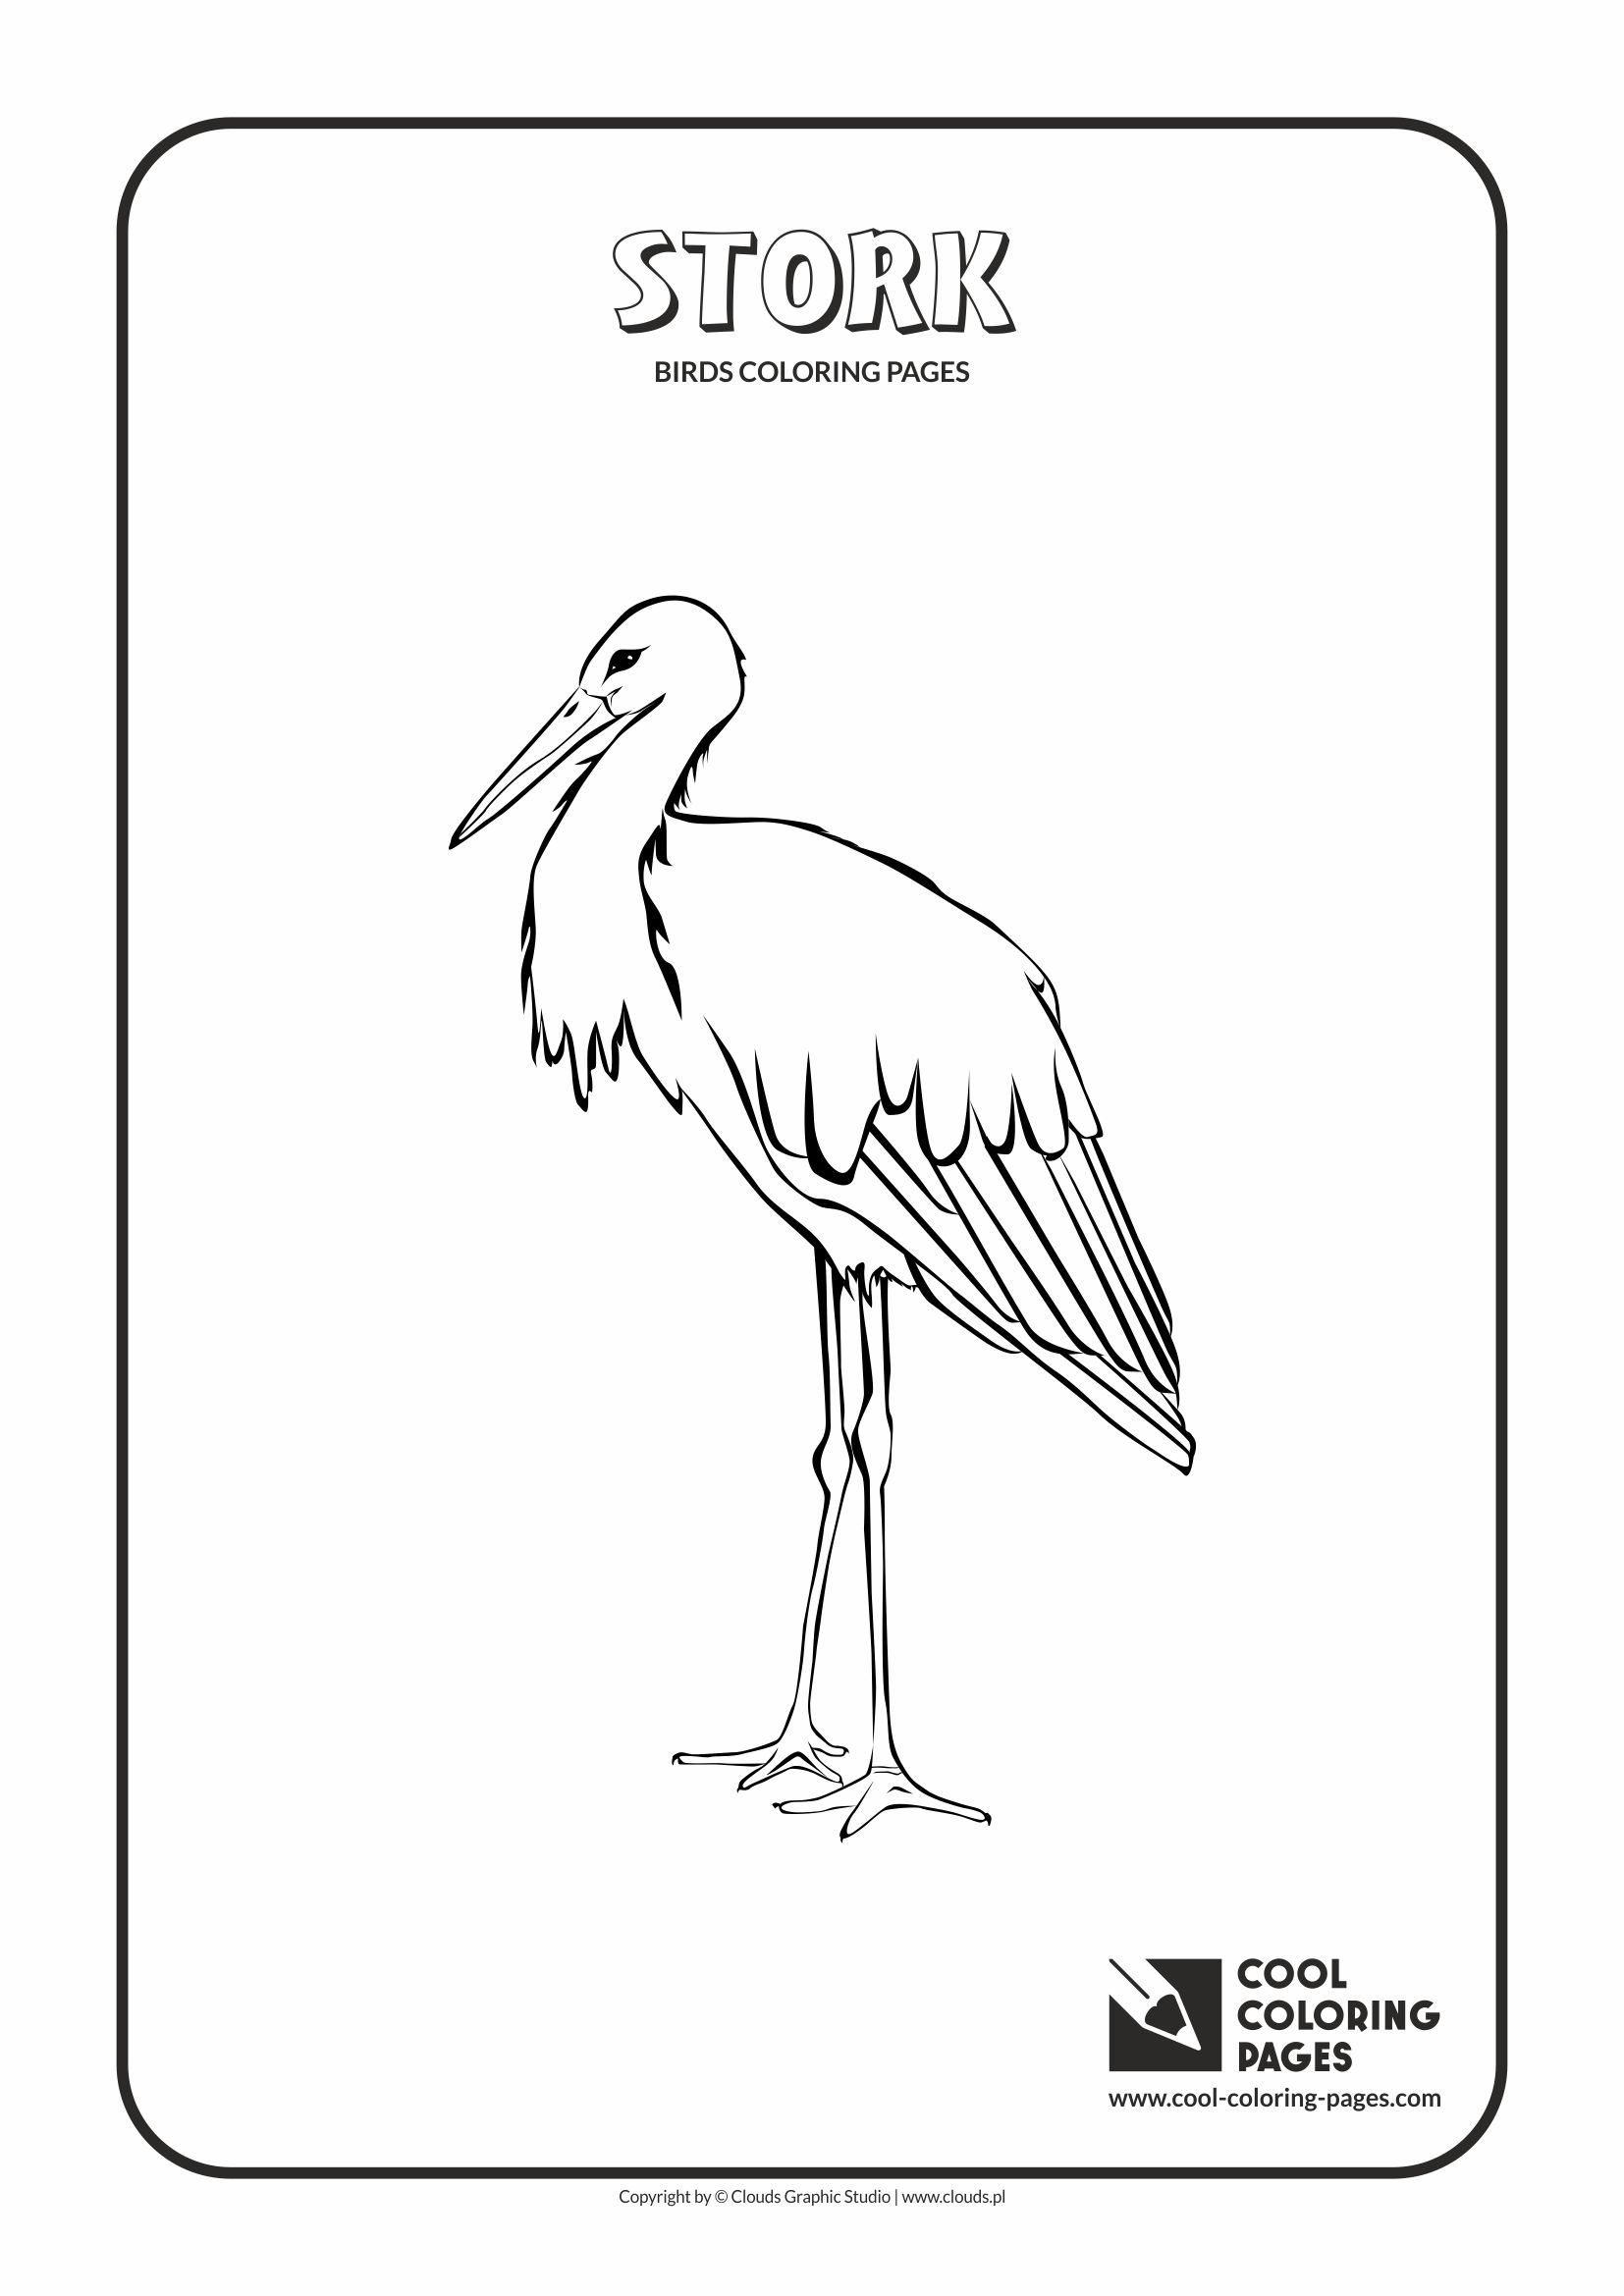 Cool Coloring Pages Birds coloring pages   Cool Coloring ...